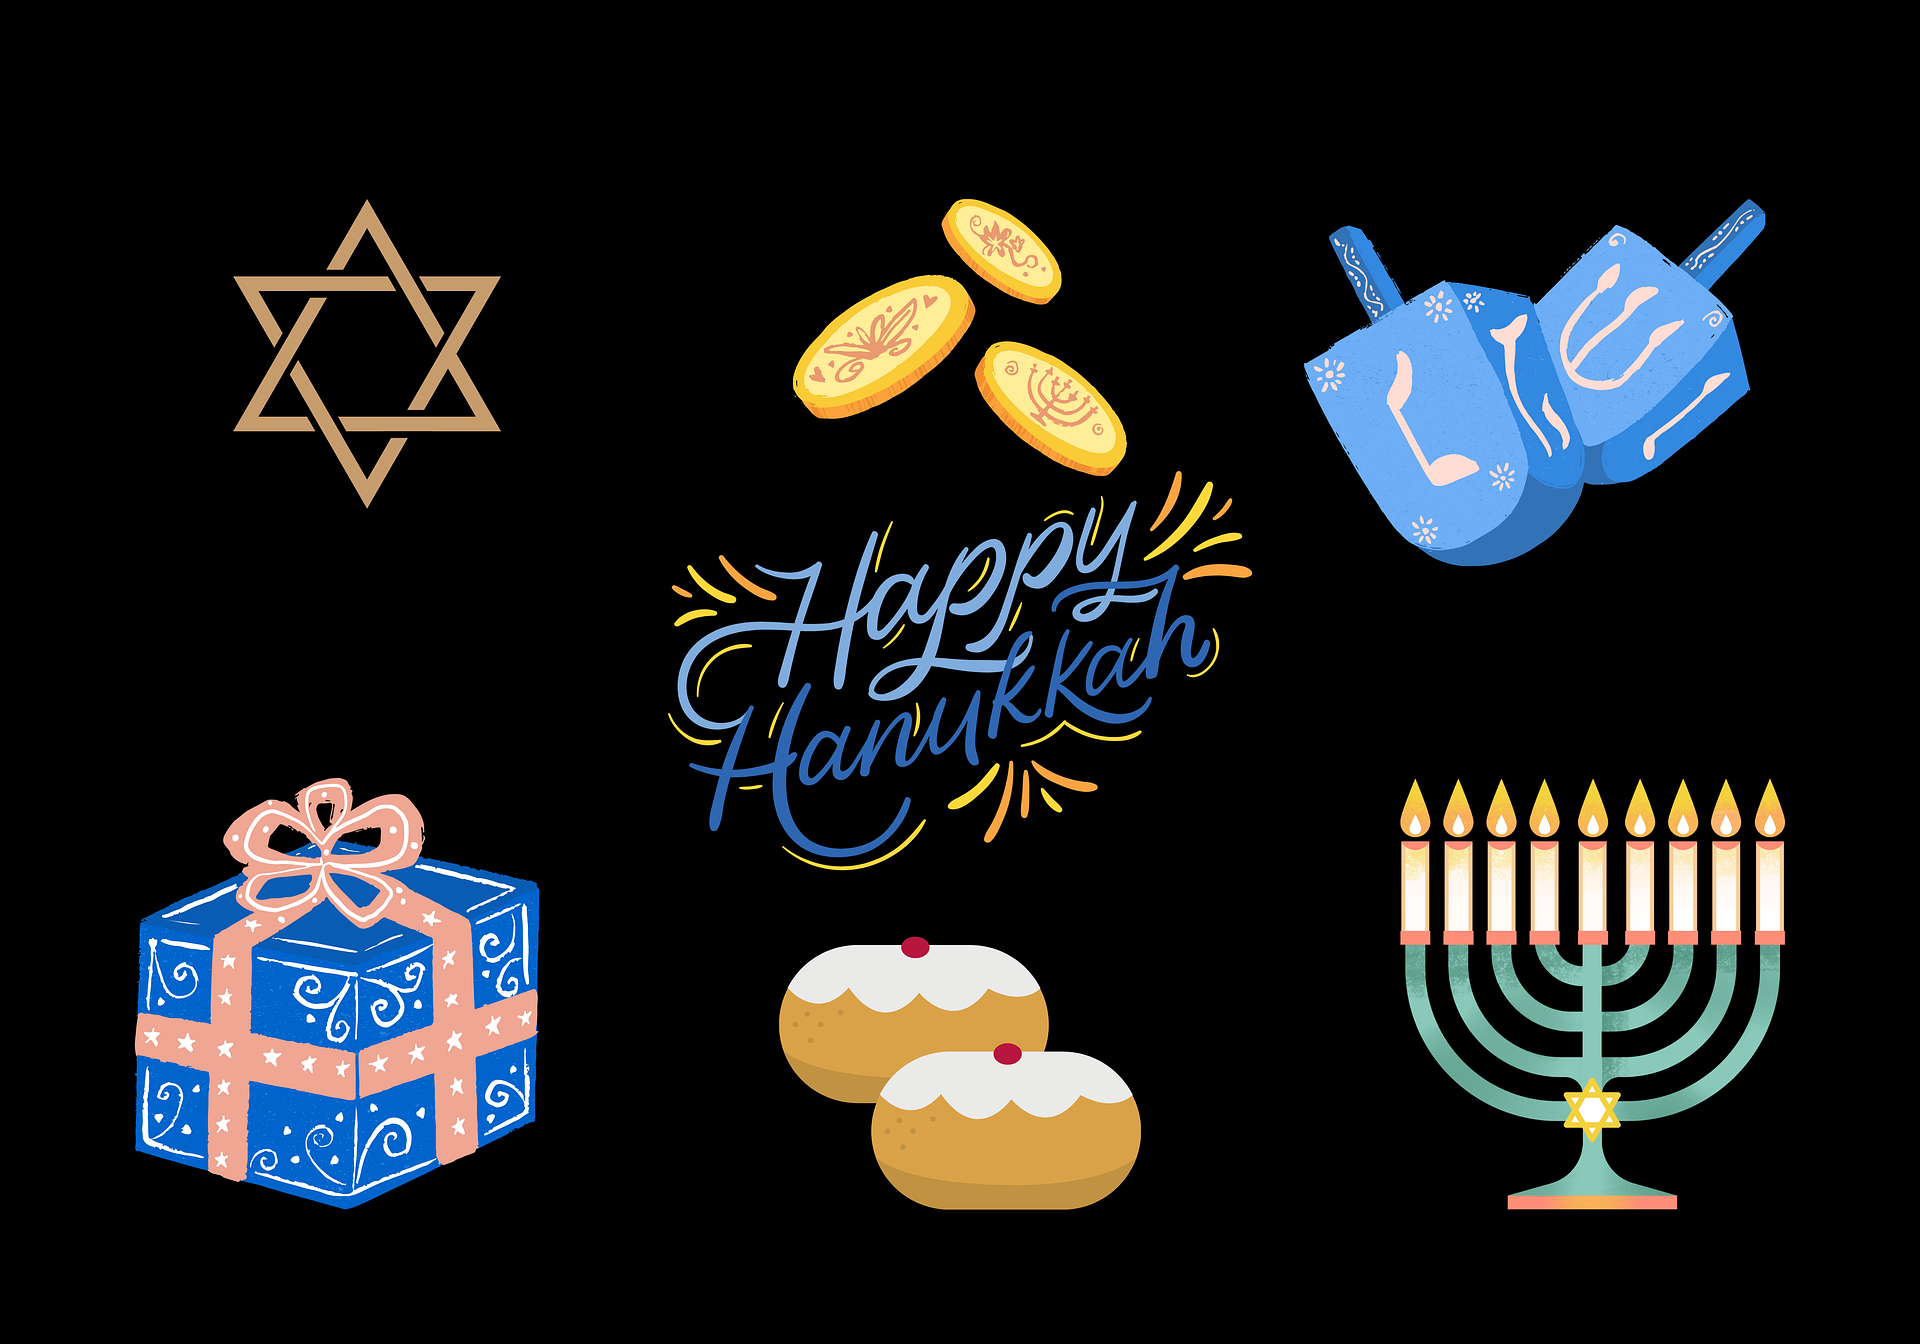 Images of all the things for a traditional Chanukah celebration are presented with "Happy Hanukkah" in the center of the image.